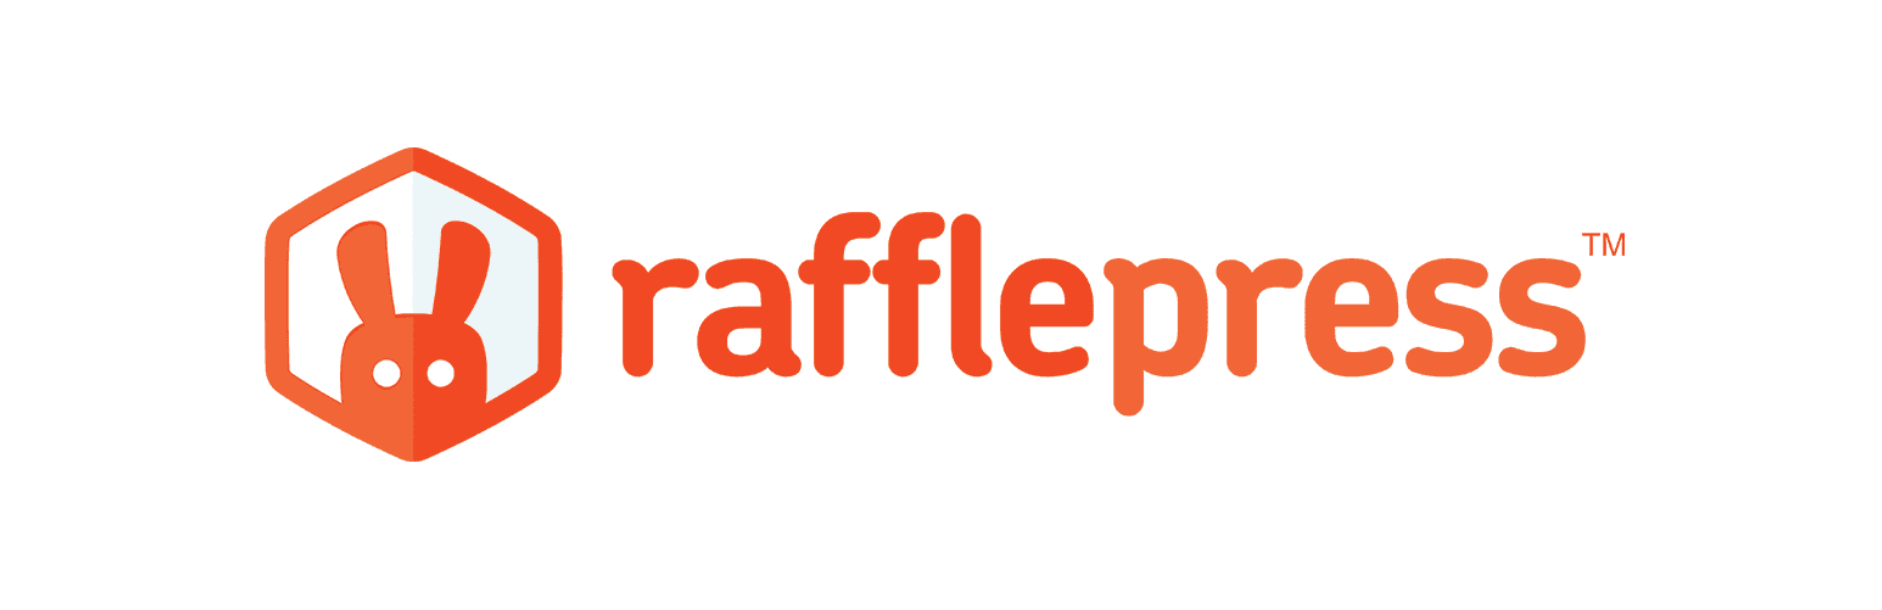 Giveaways and Contests by RafflePress - Top 20+ Best Plugins to Increase Sales in WooCommerce – HostNamaste.com